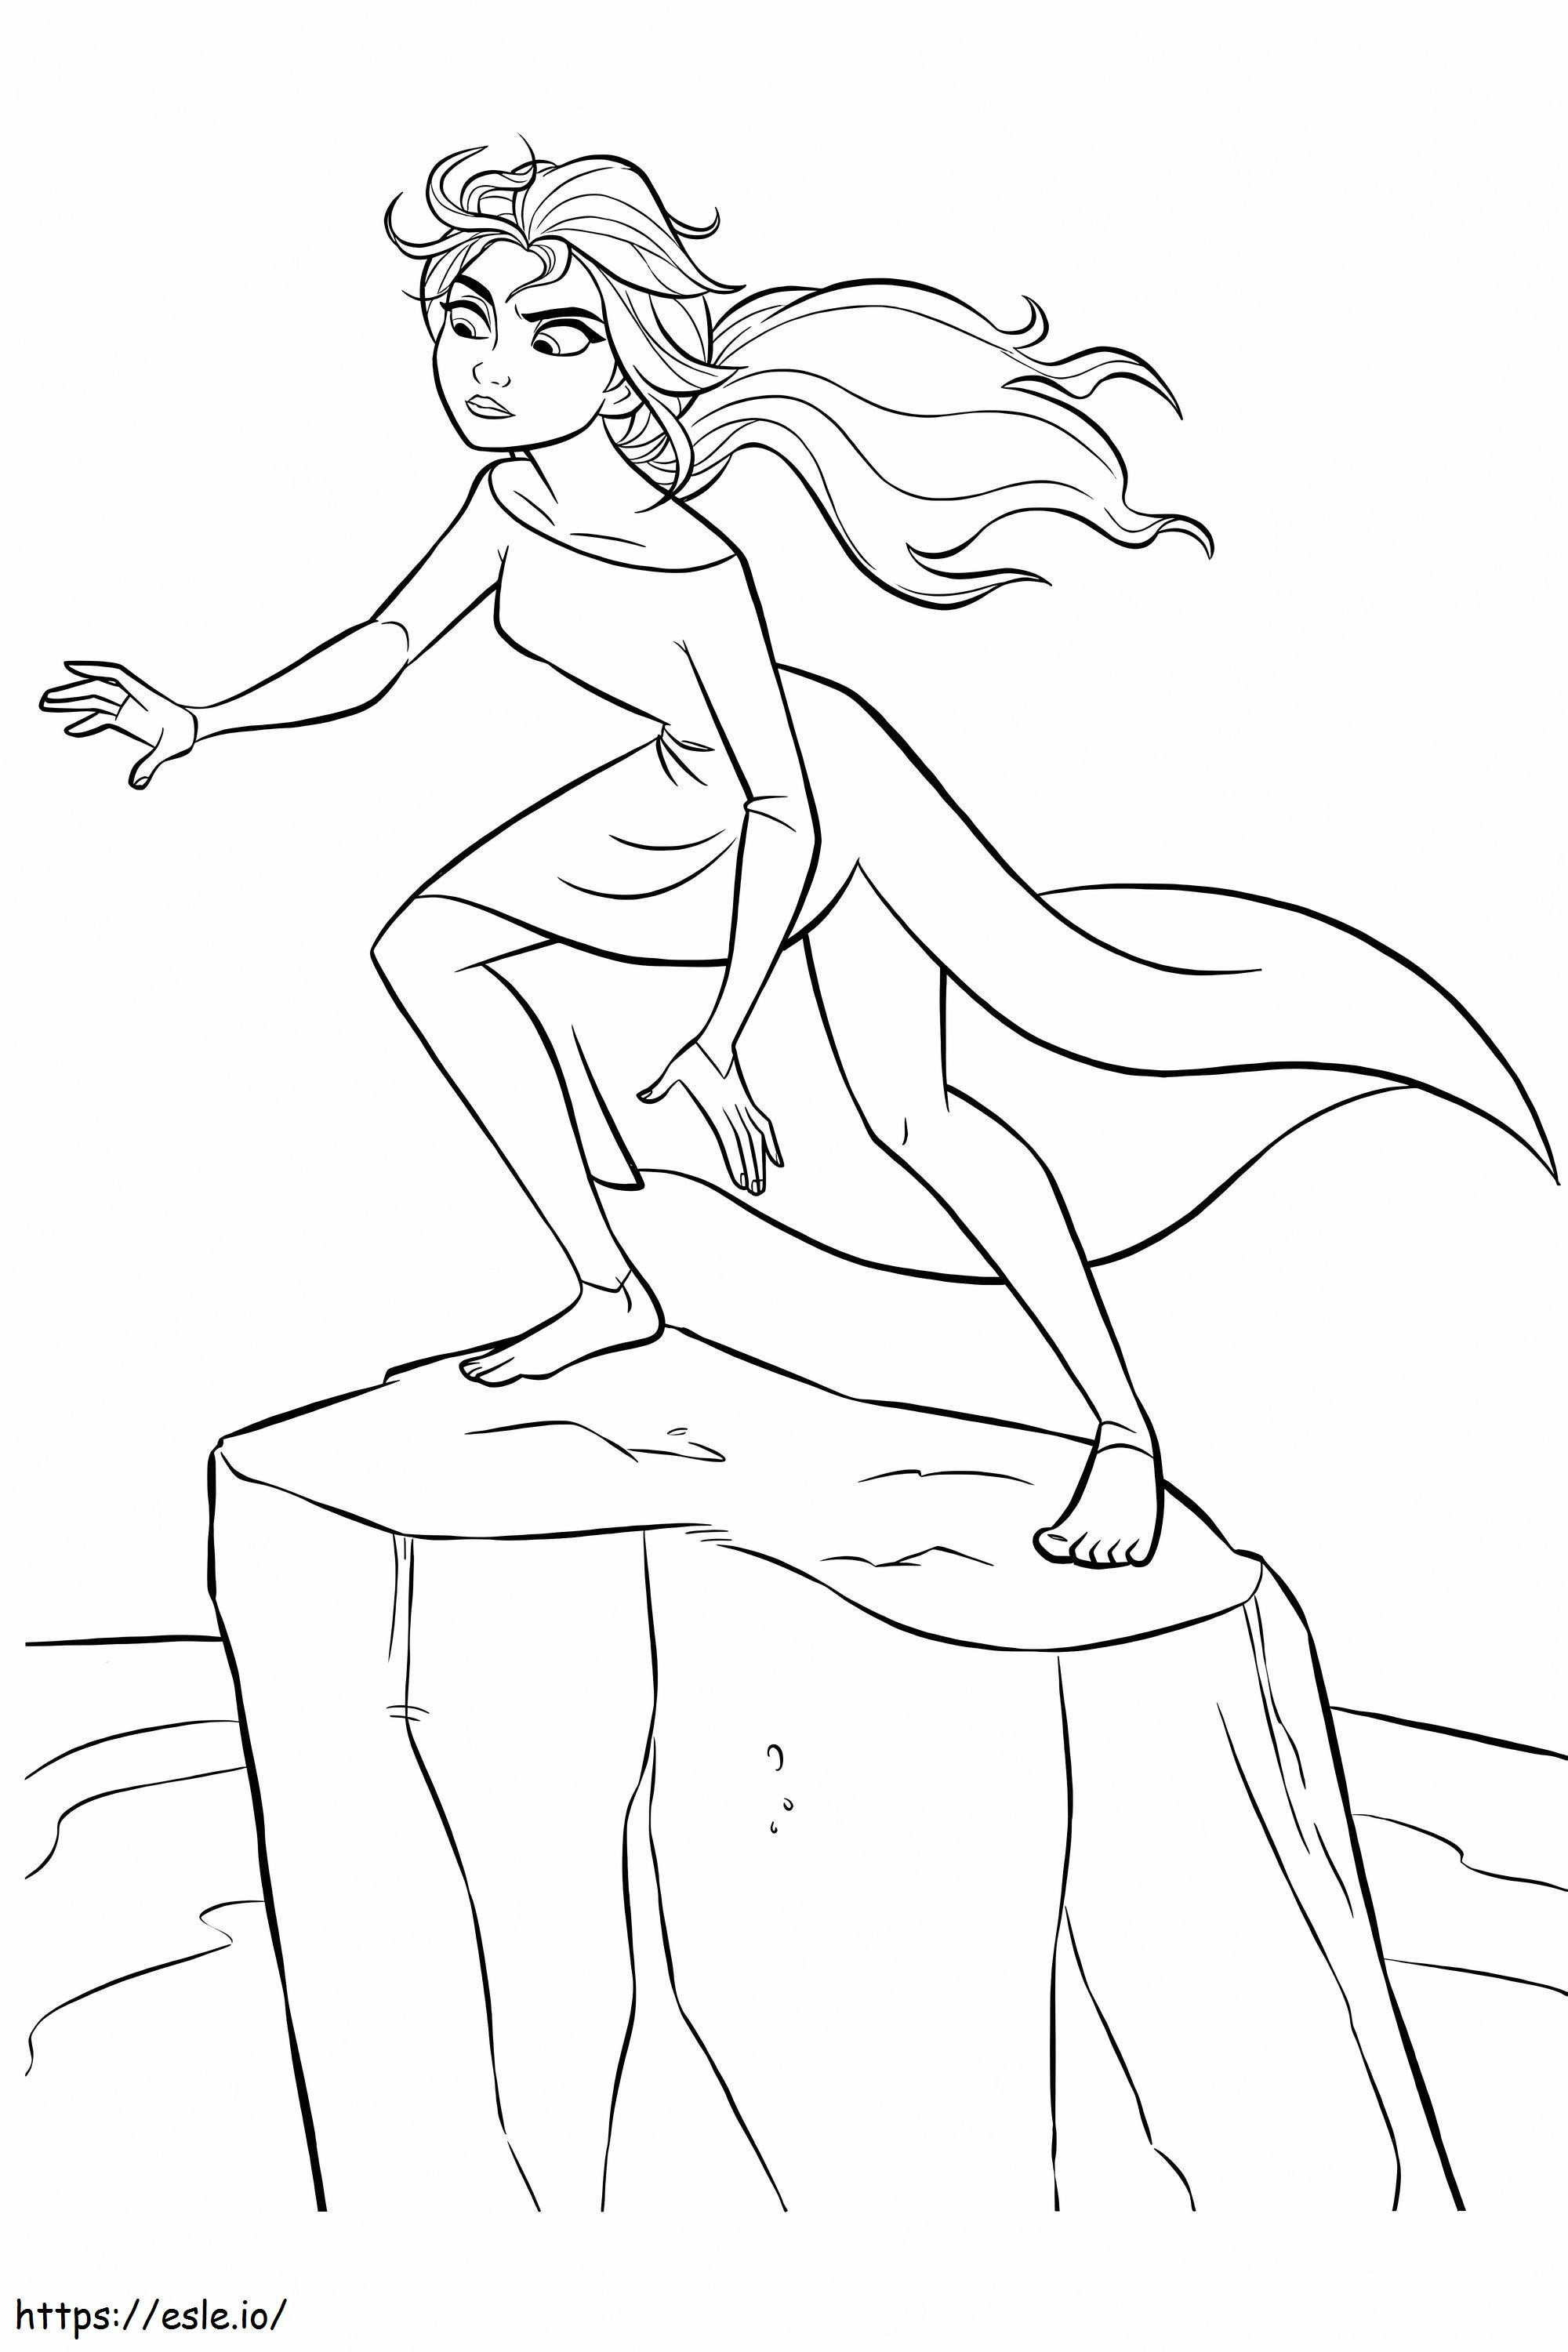 Elsa On Ice coloring page